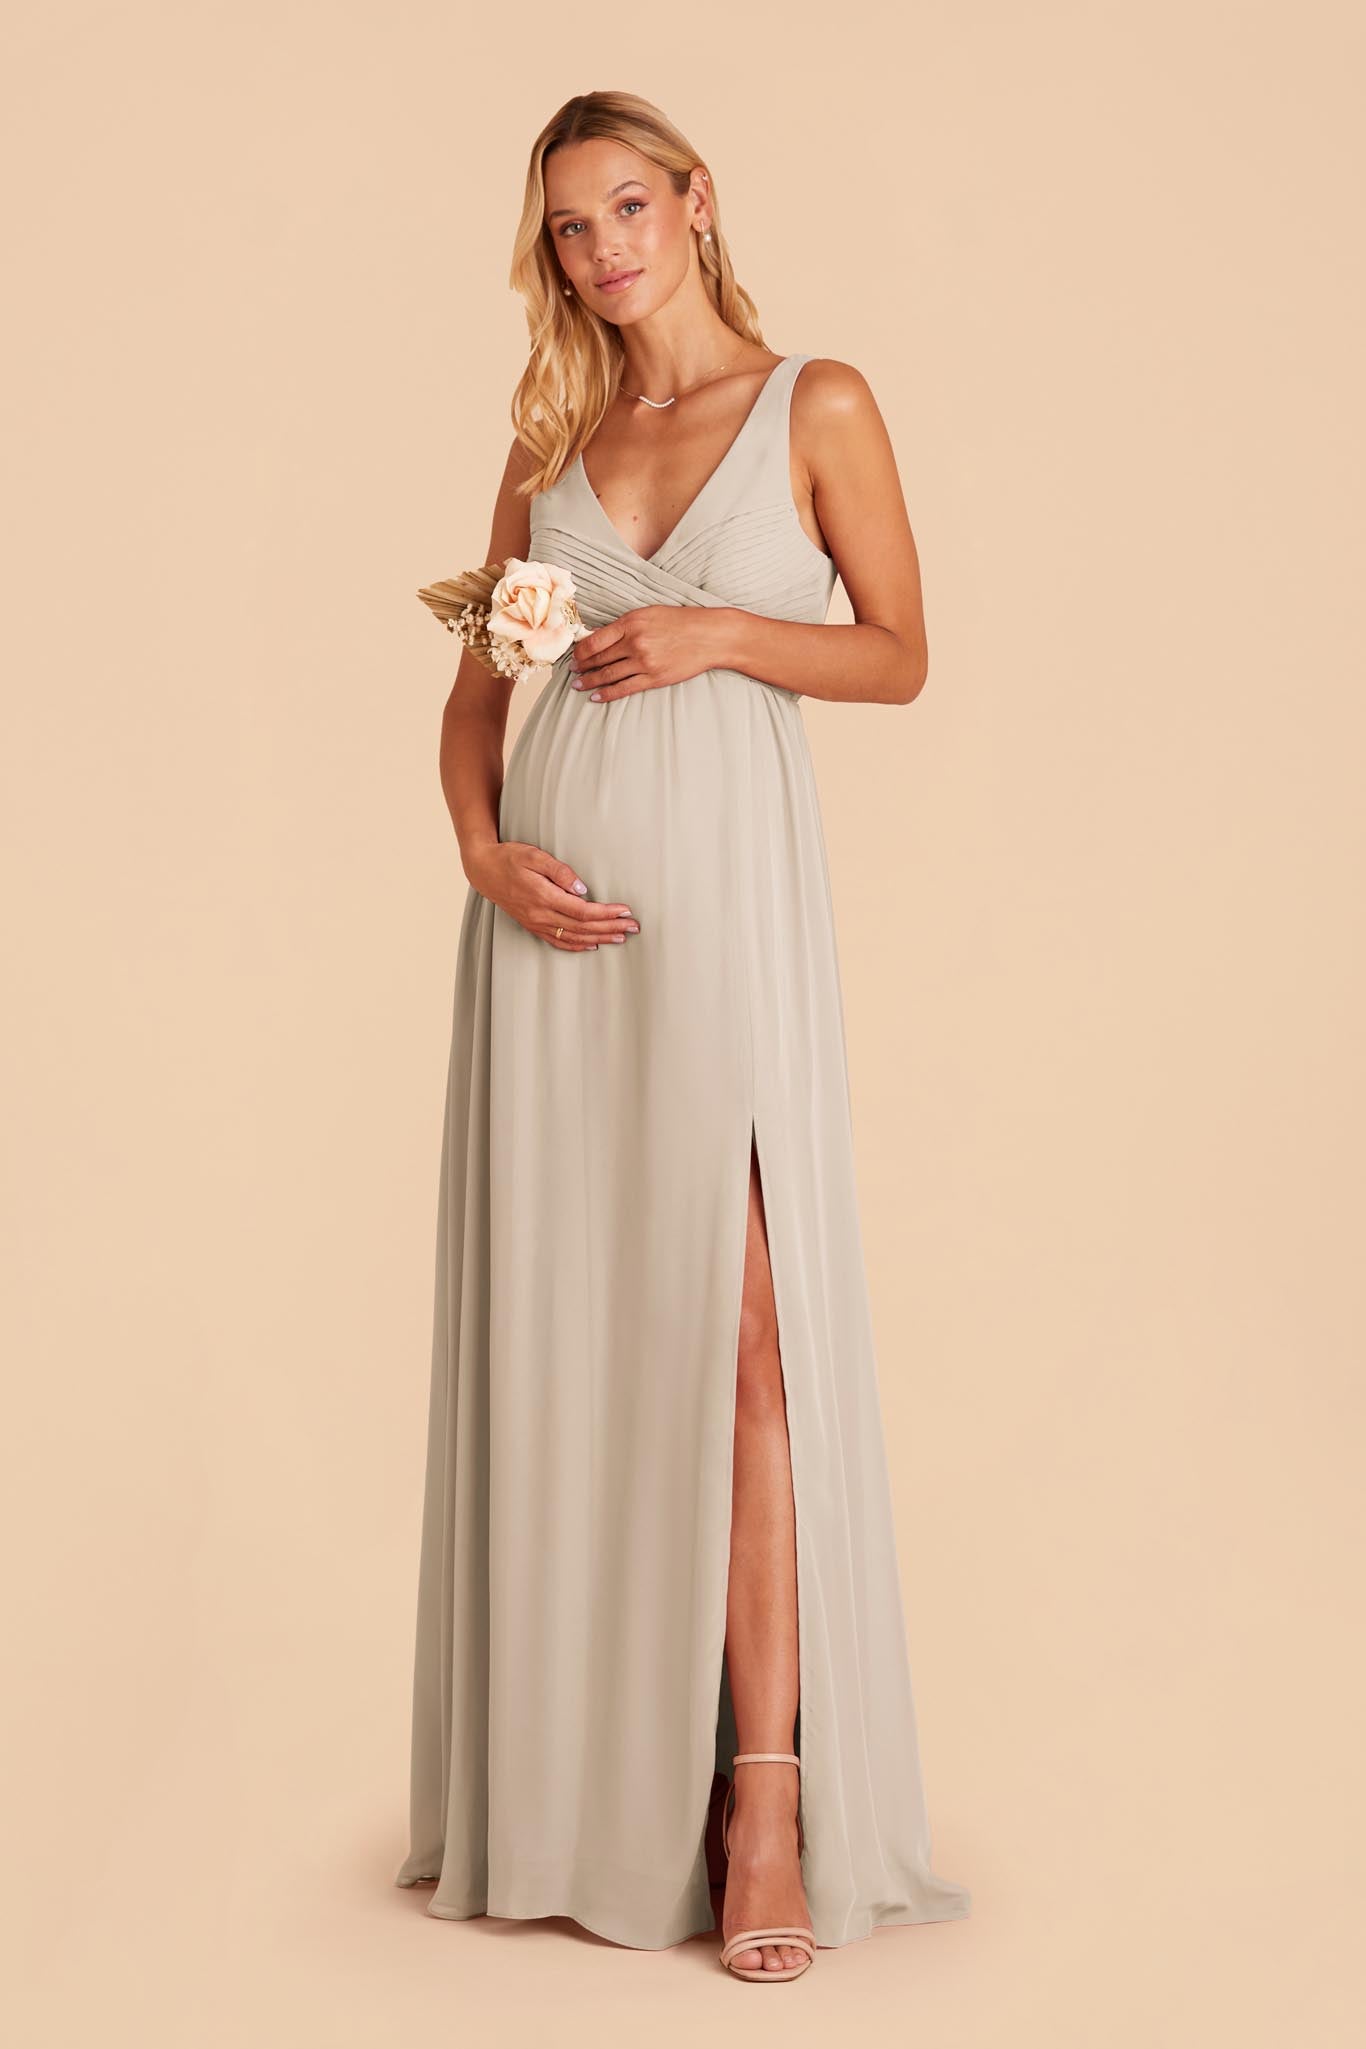 Neutral Champagne Laurie Empire Dress by Birdy Grey